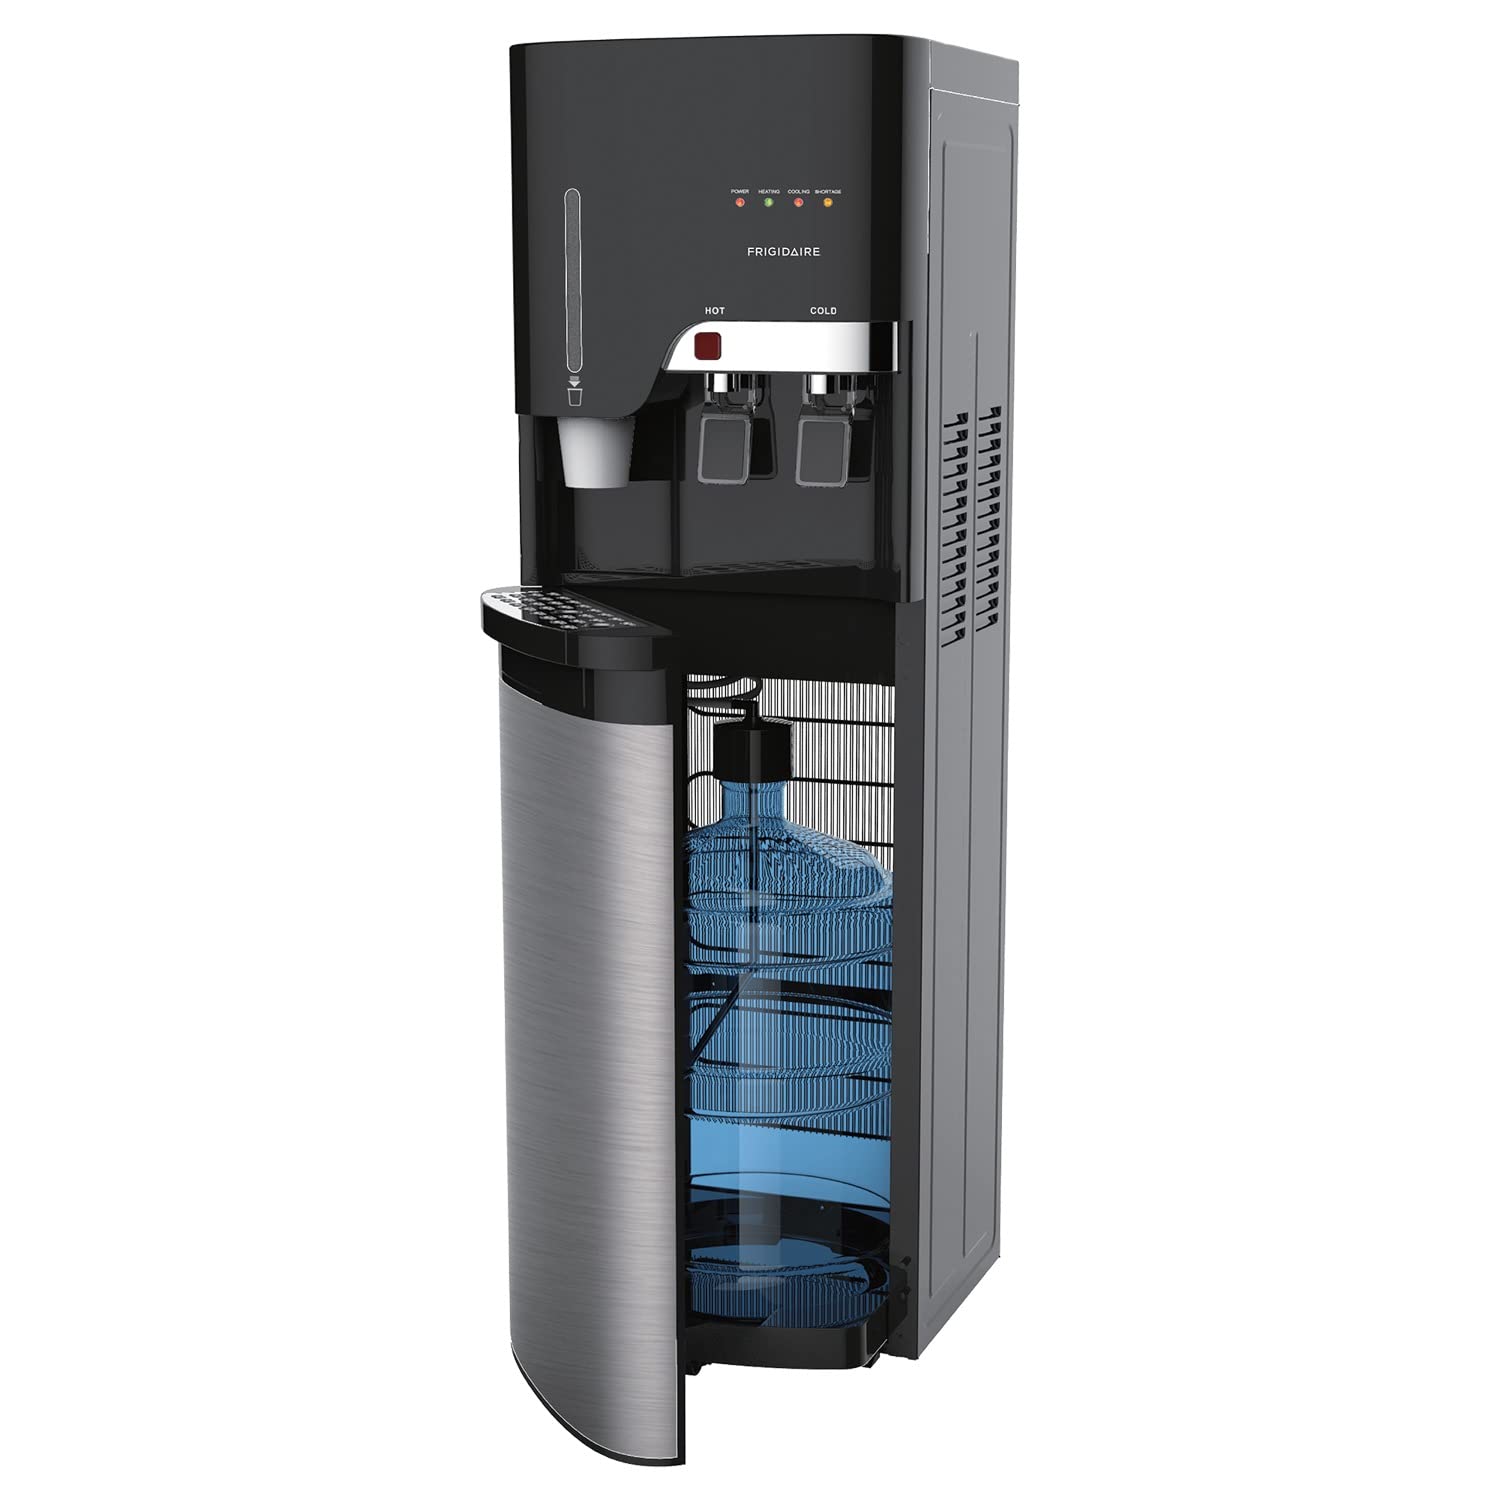 Frigidaire EFWC900 Water Cooler/Dispenser with Cup Storage -2 Temperature Settings - Bottom Loading - Premium Stainless Steel - Child Saftey